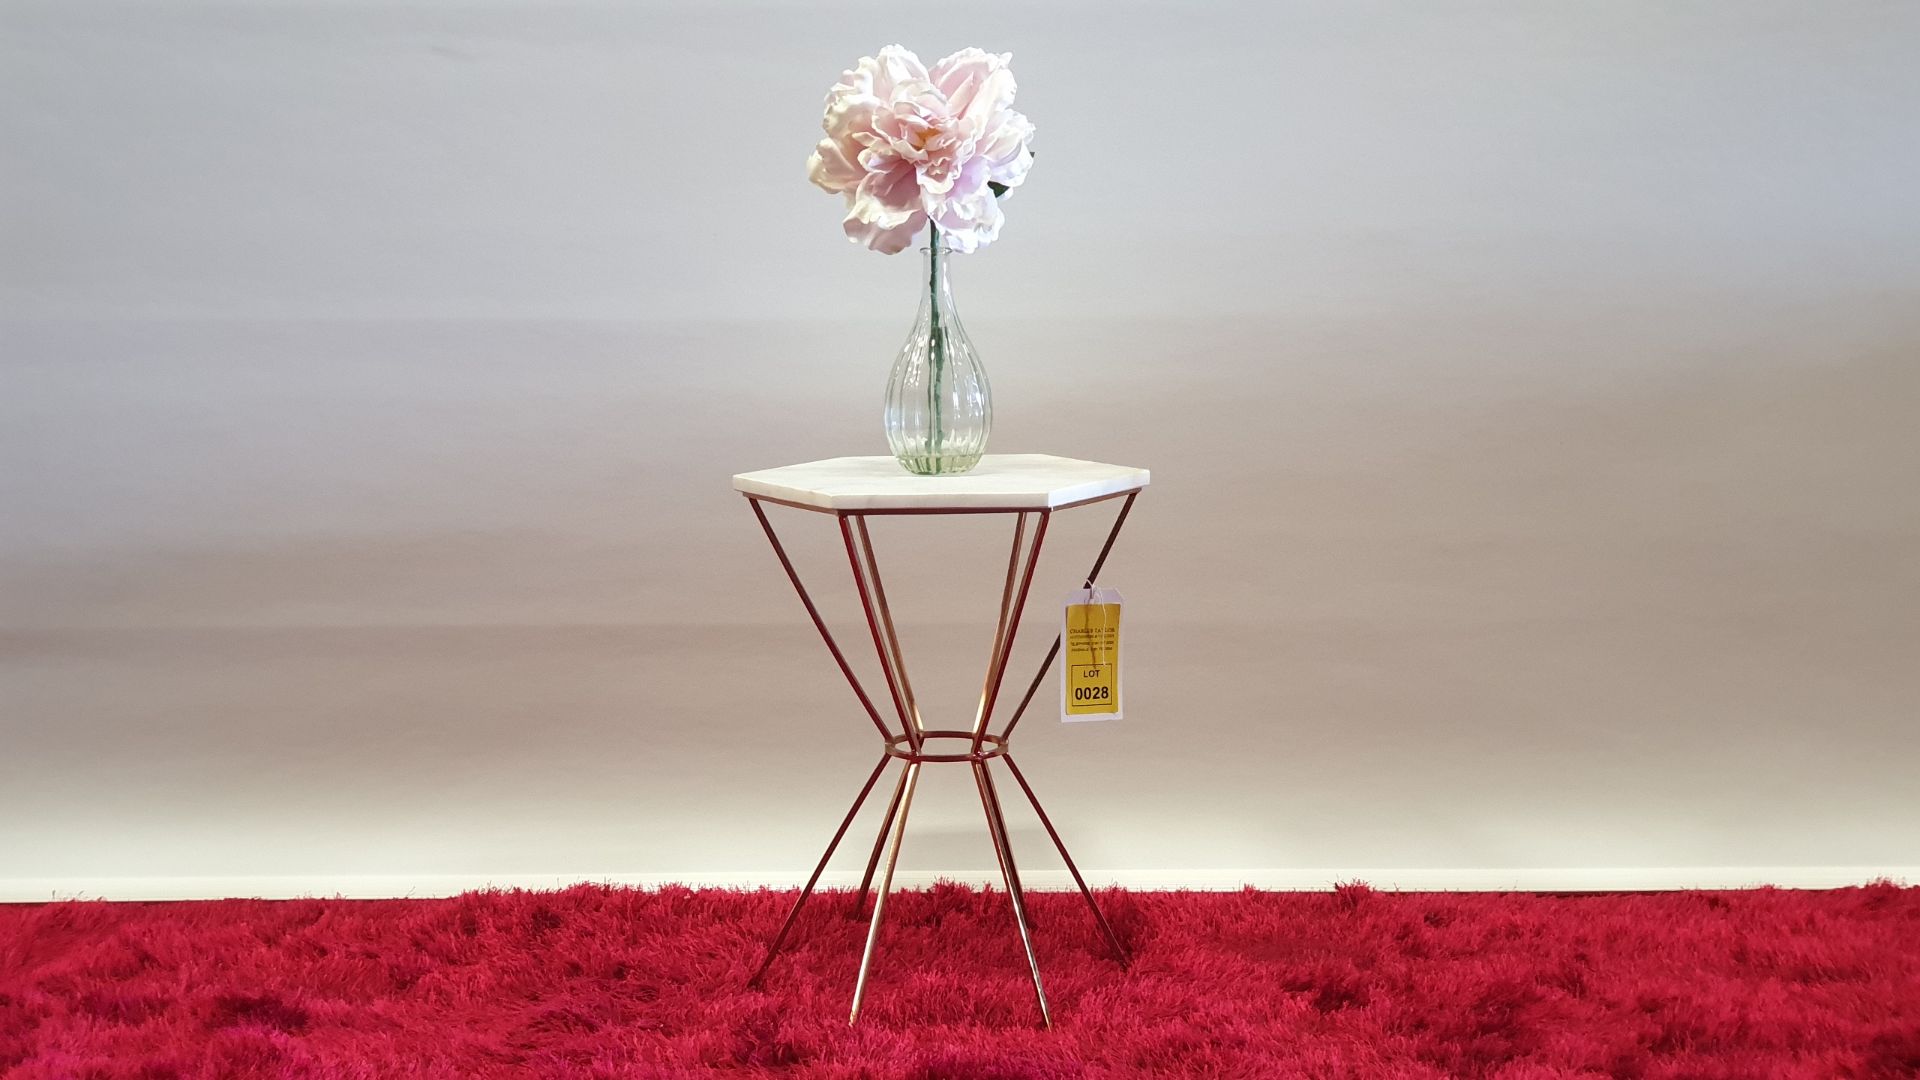 BRAND NEW COPPER METAL MARBLE SIDE TABLE 370W X 370D X 470H MM RRP £159